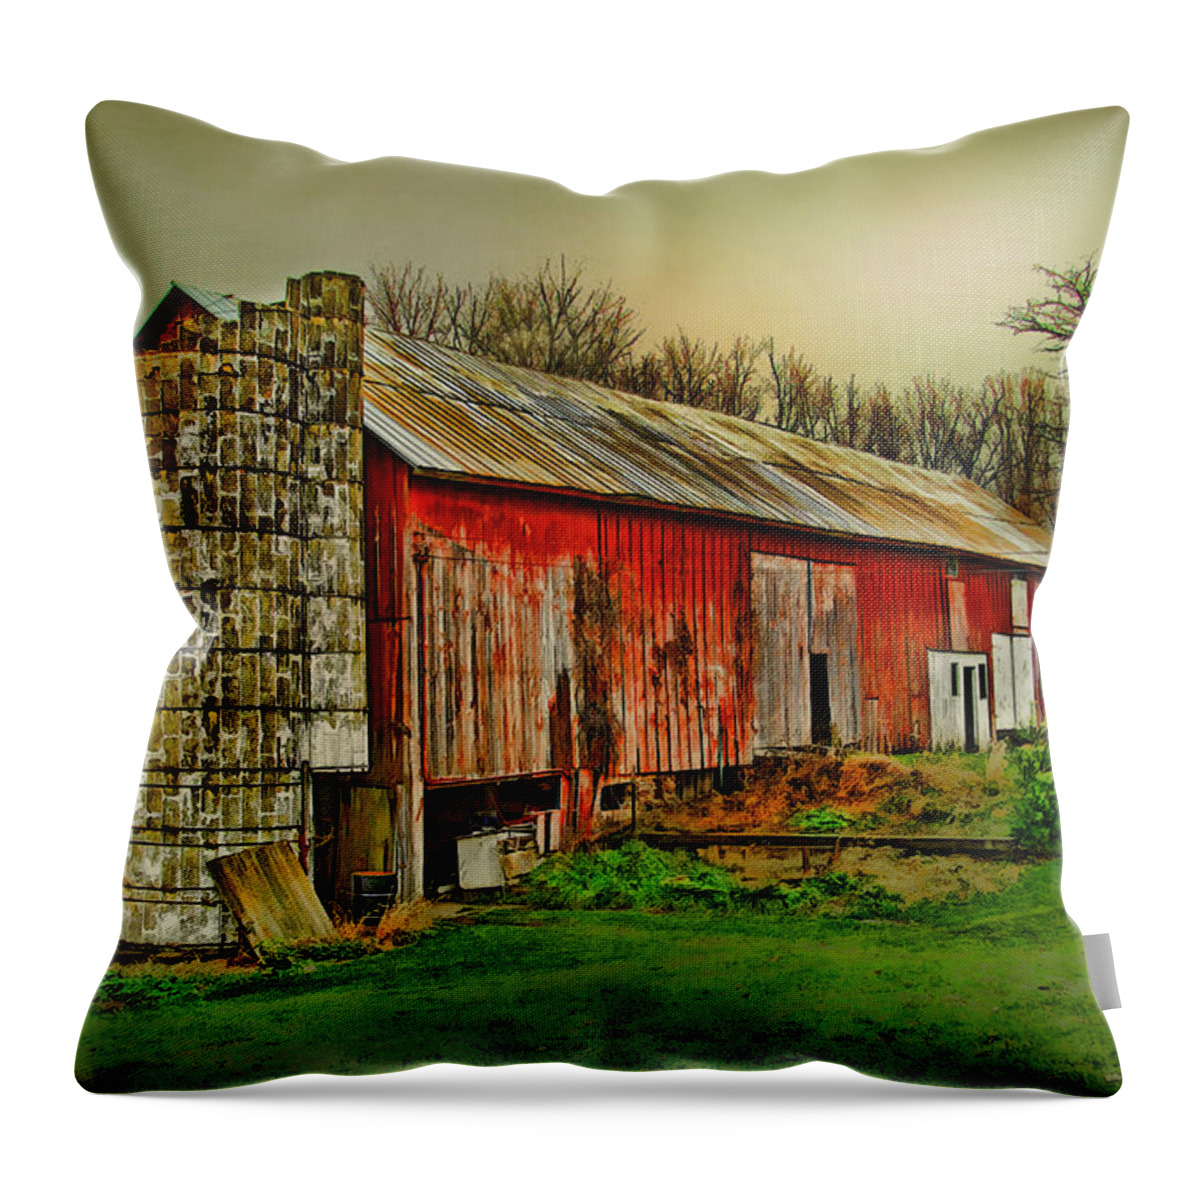 Fall Throw Pillow featuring the photograph Fall Barn by Mary Timman